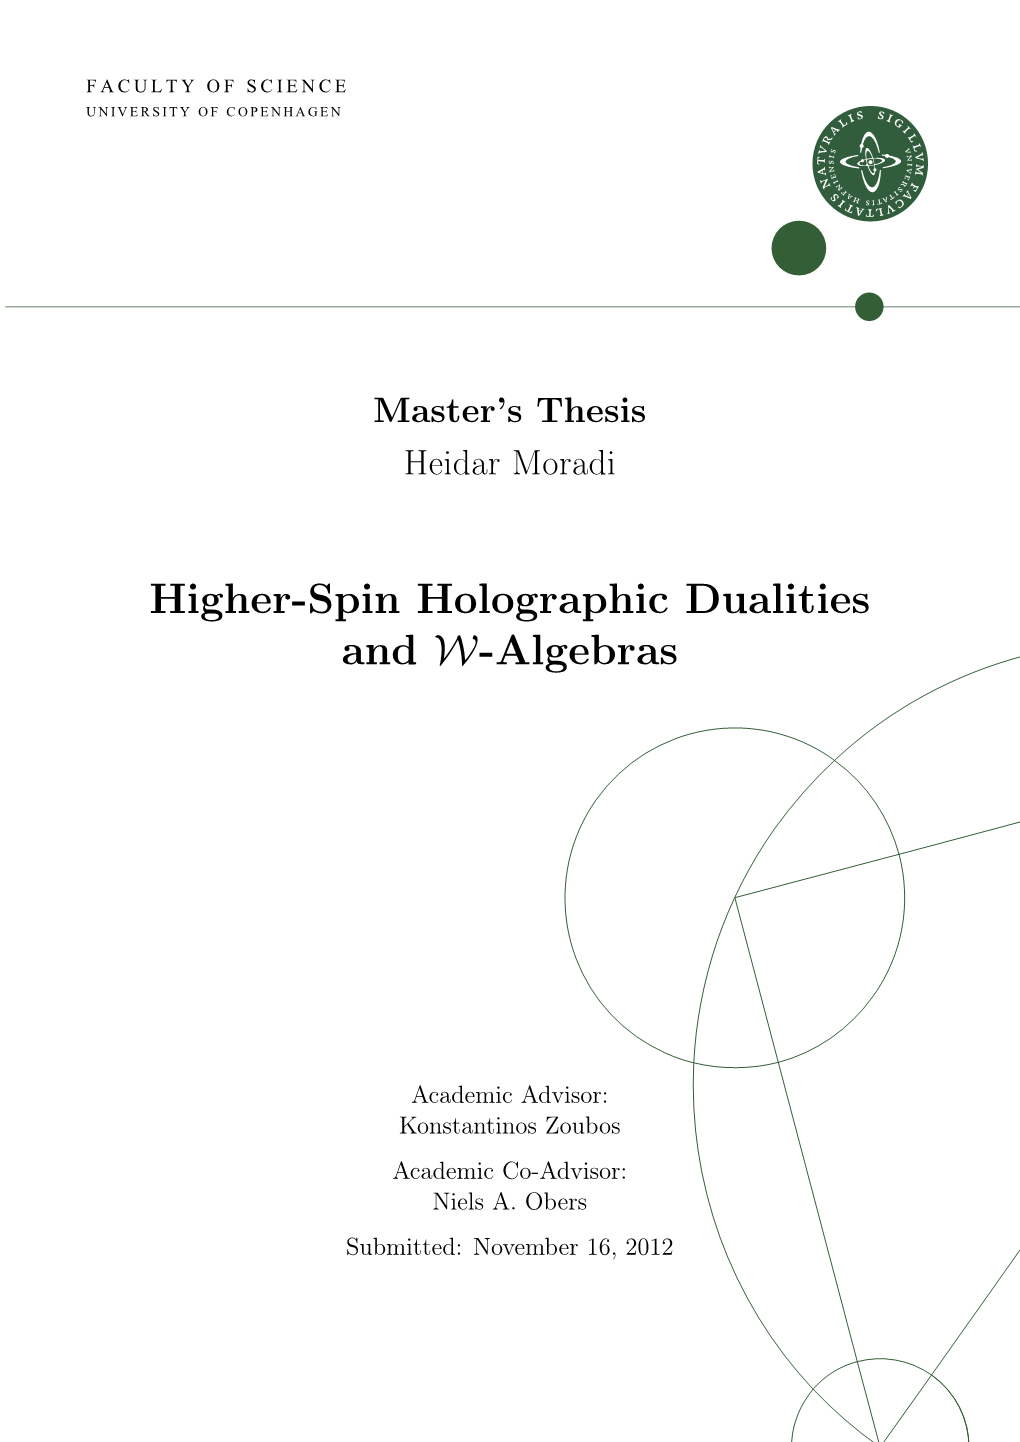 Higher-Spin Holographic Dualities and W-Algebras